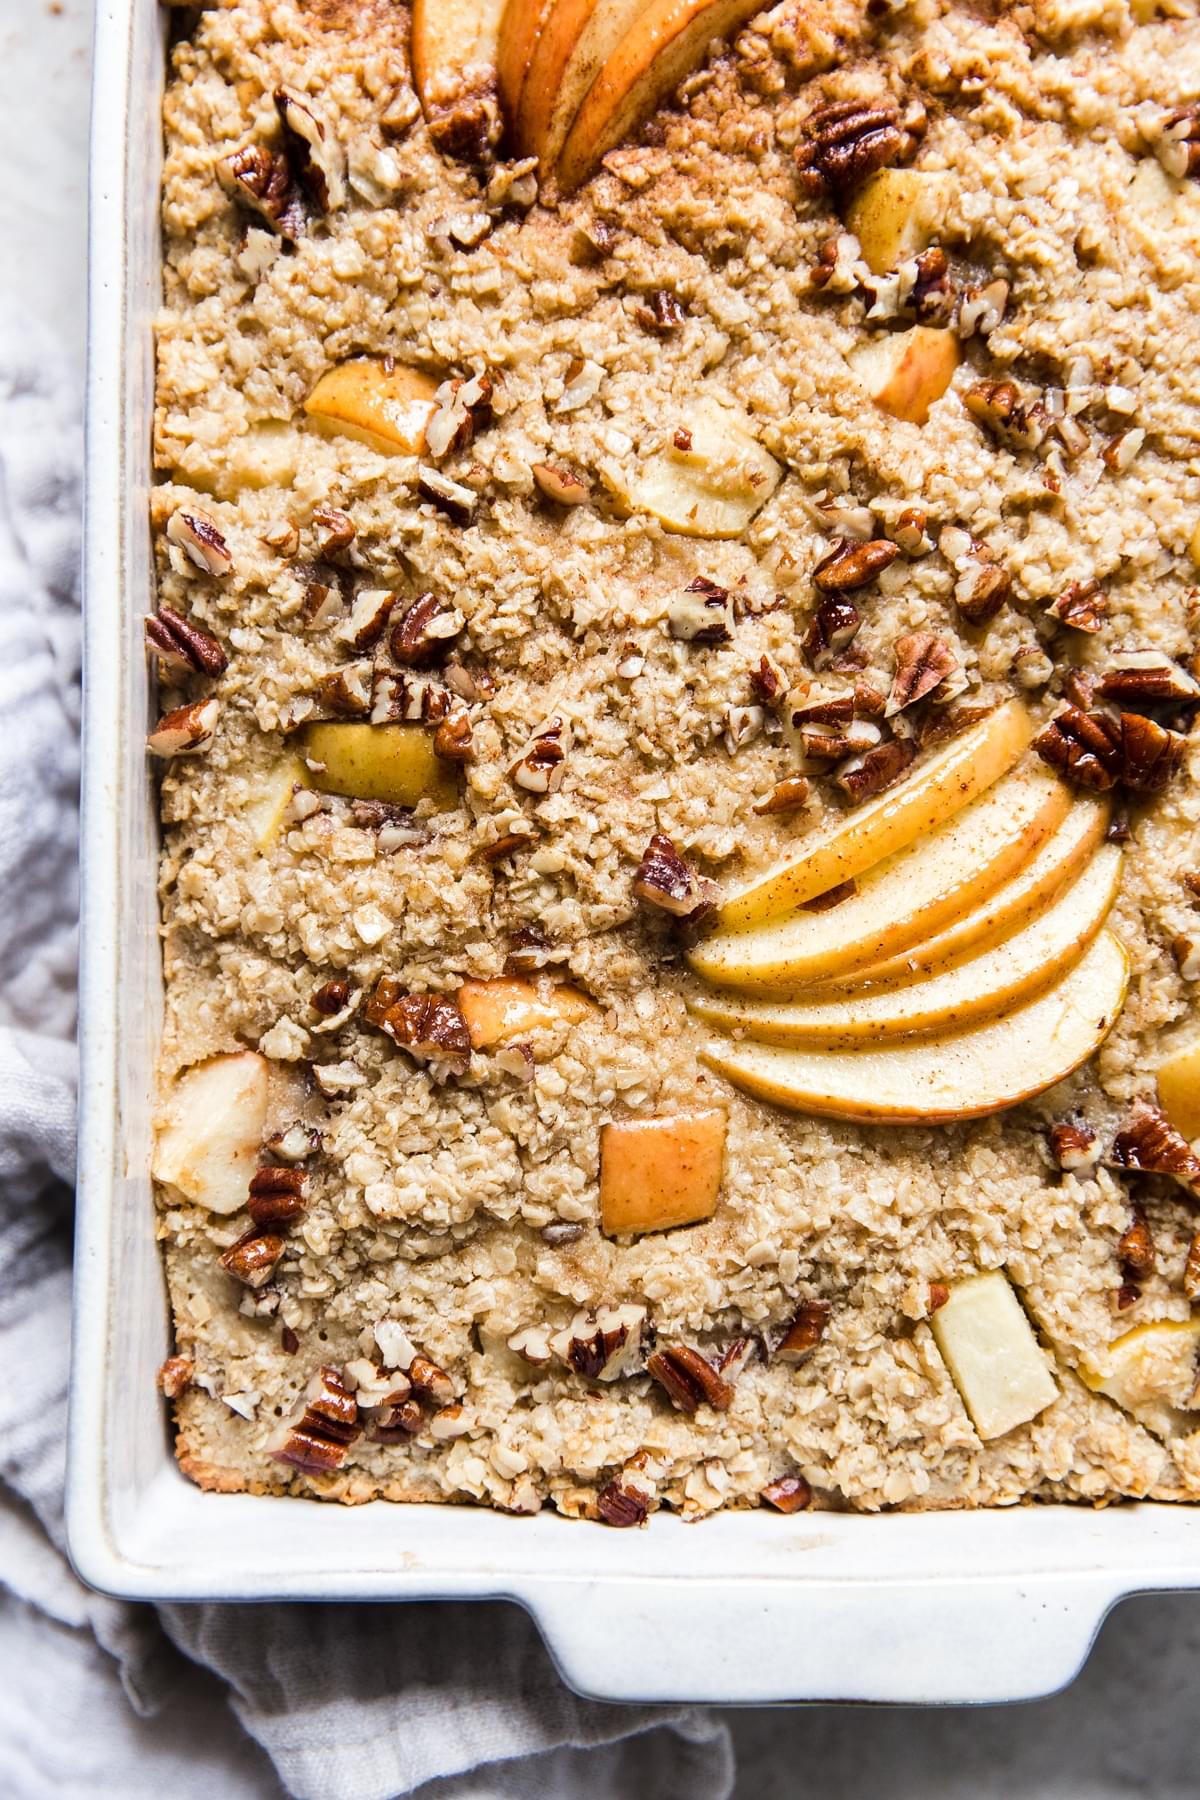 Baked Oatmeal in a baking dish With Apples, pecans and maple syrup